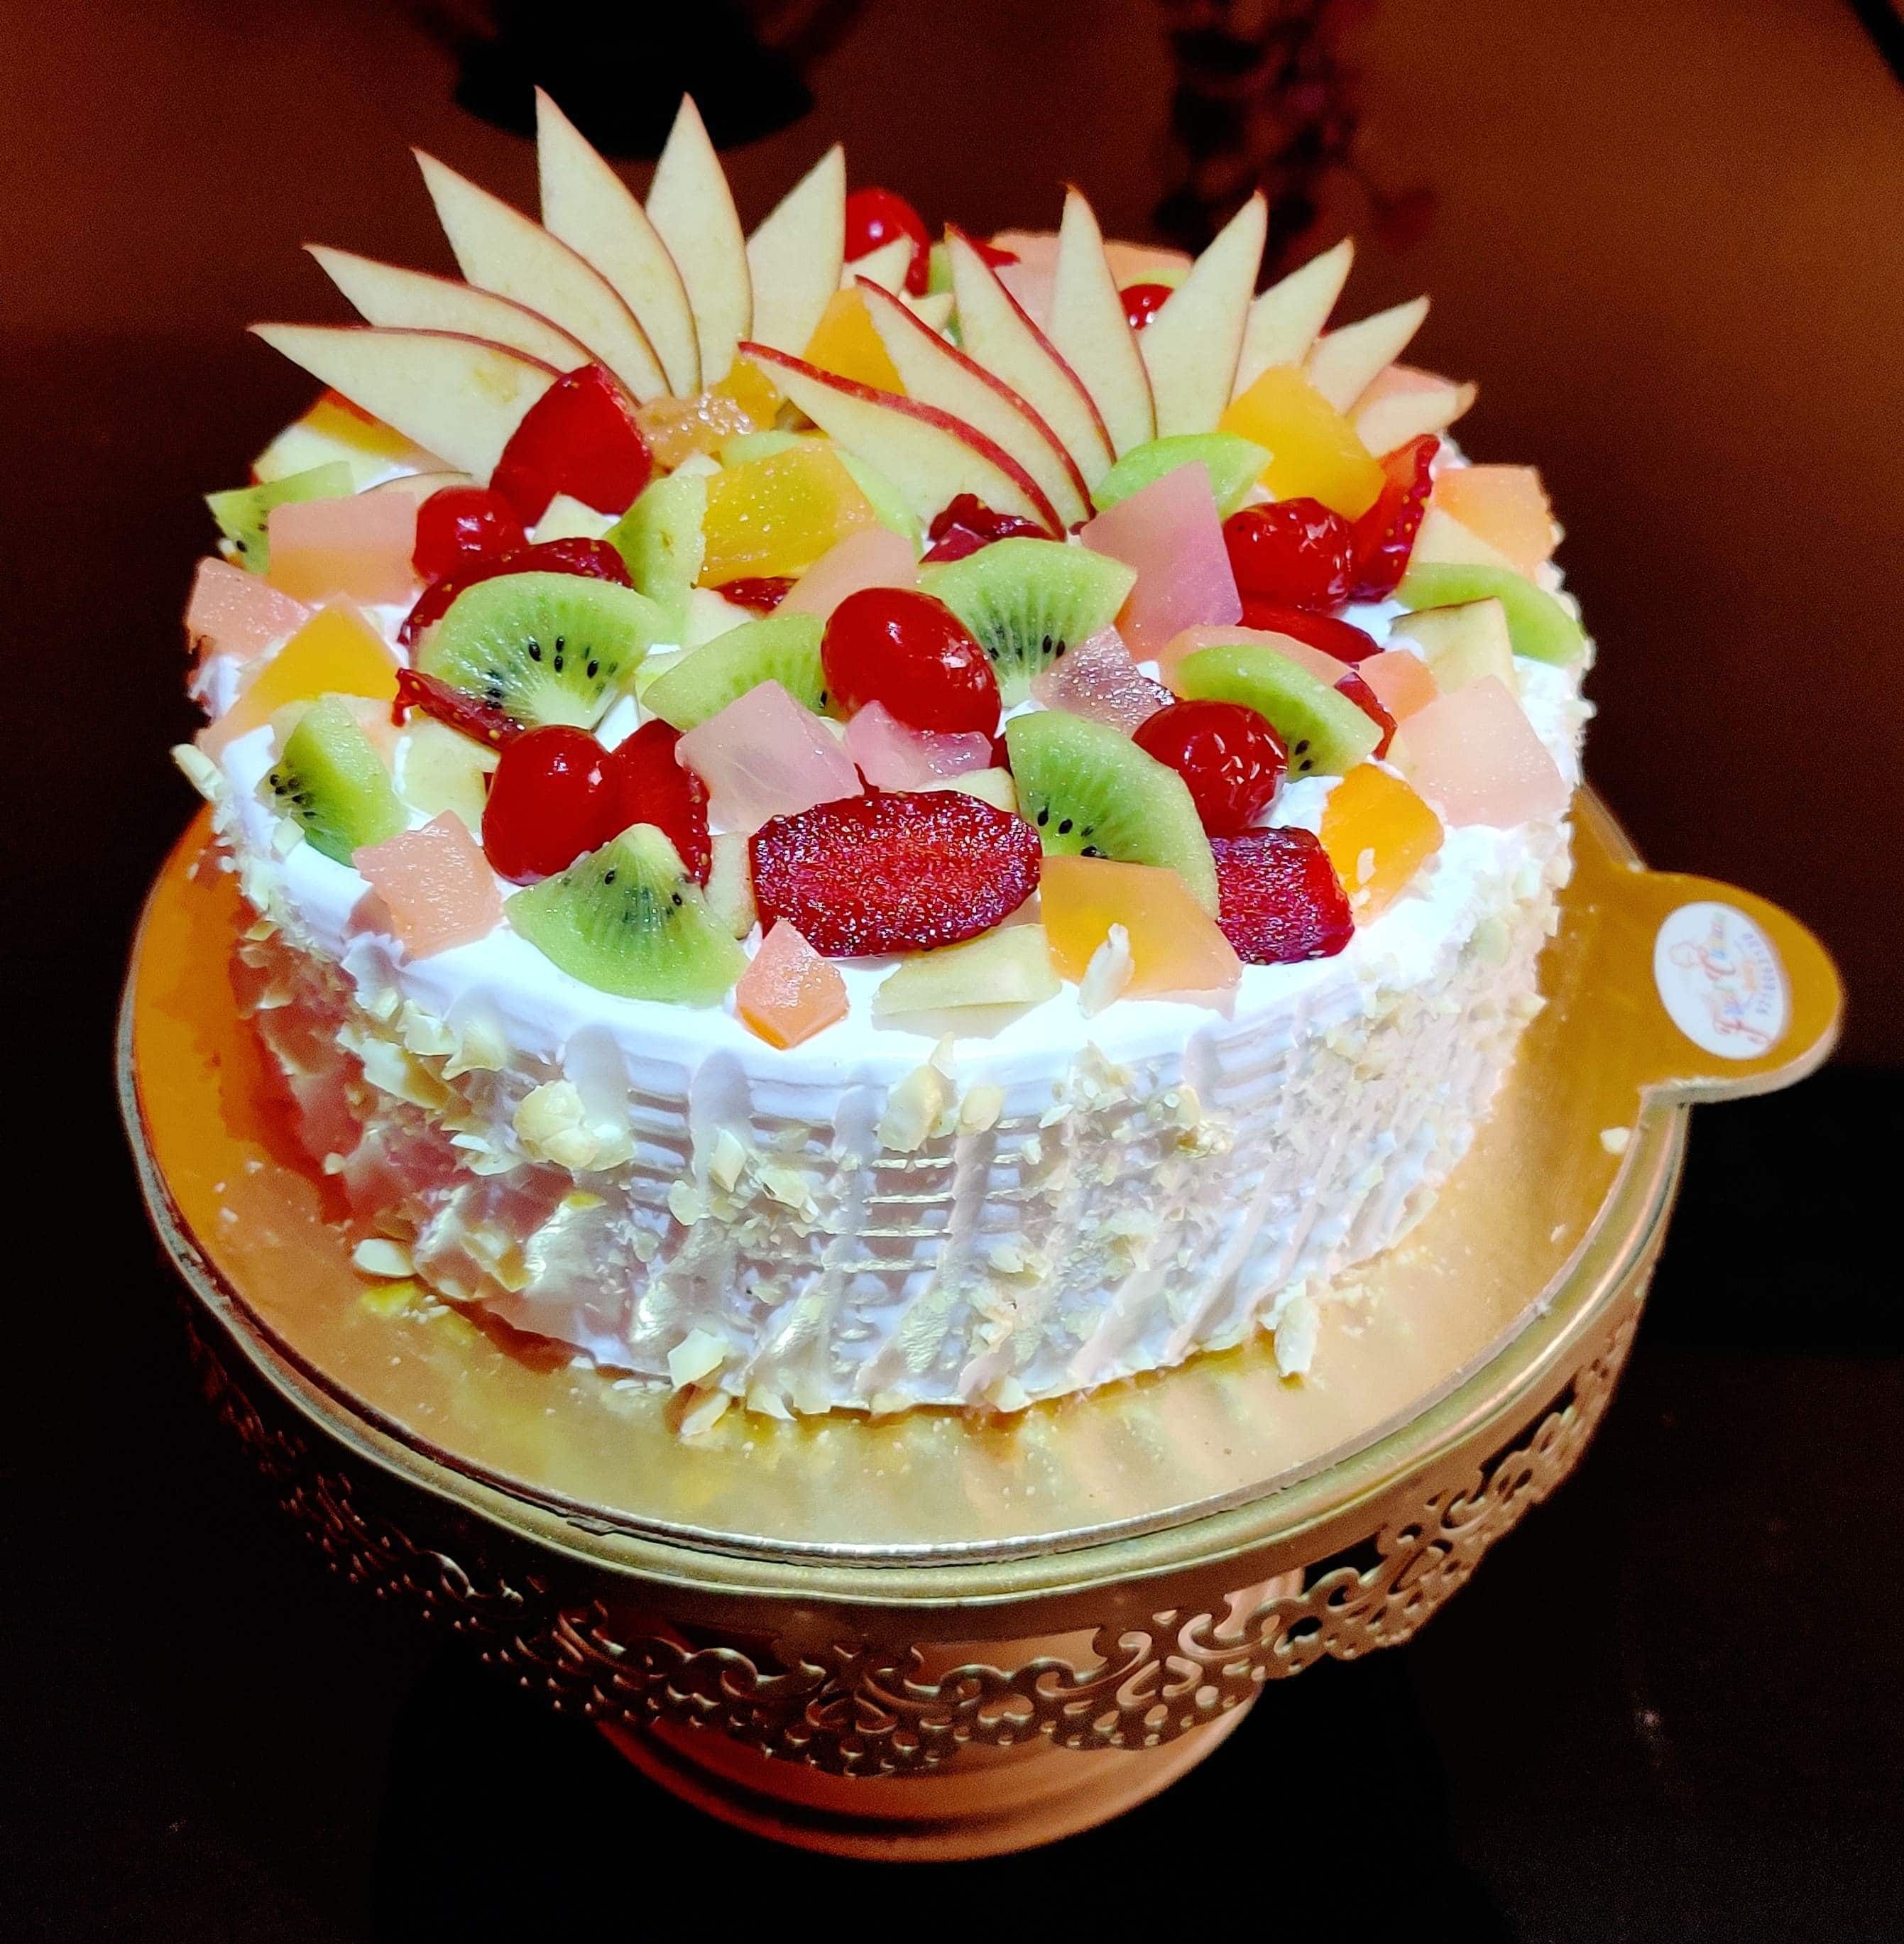 Surprise India Cakes & Desserts, Ameerpet order online - Zomato